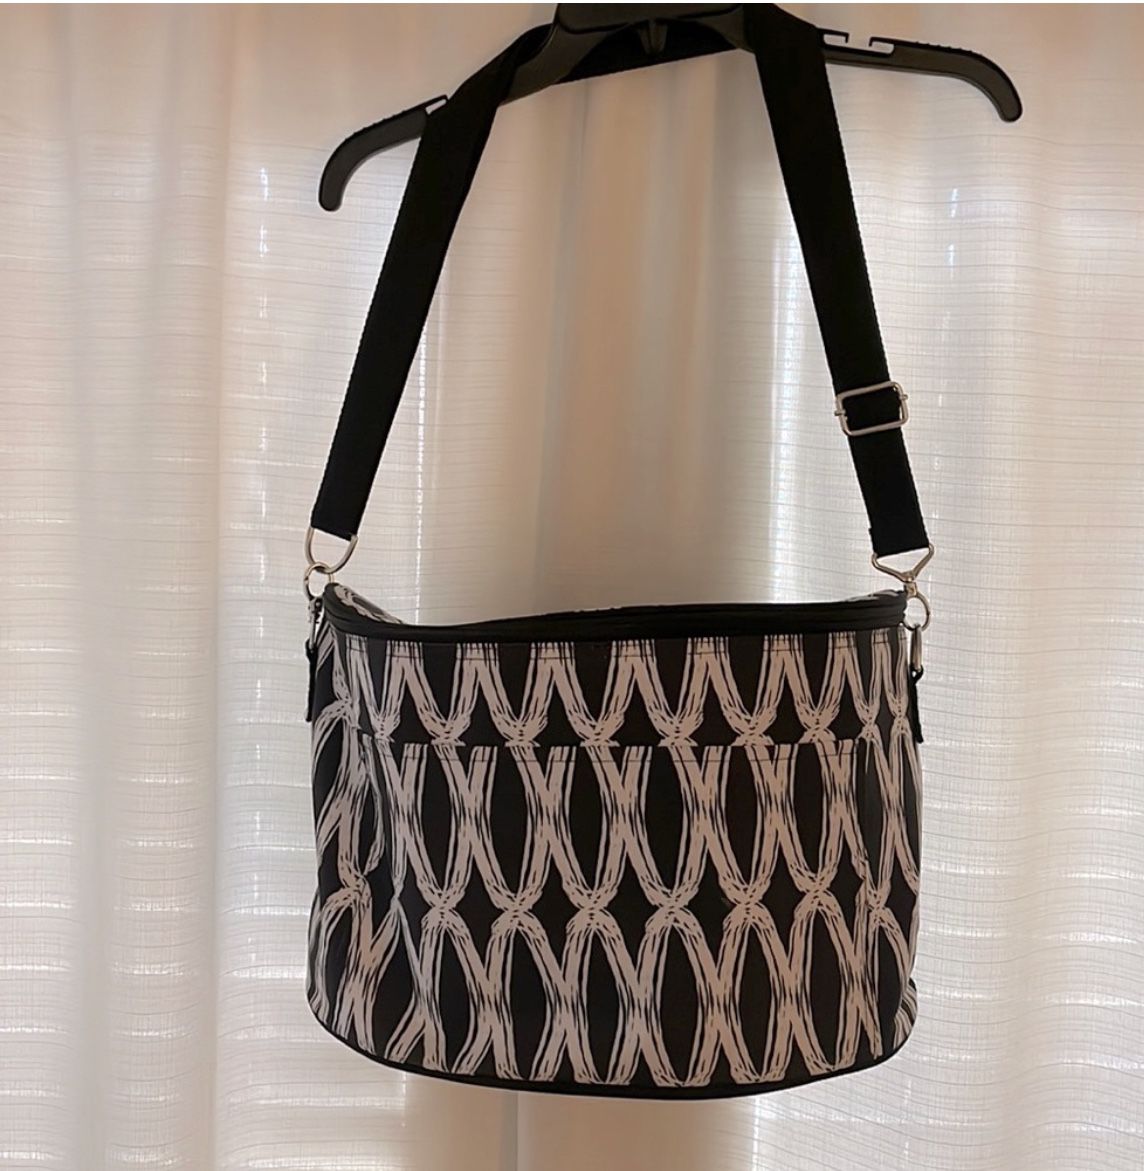 New and used Thirty-One Tote Bags for sale